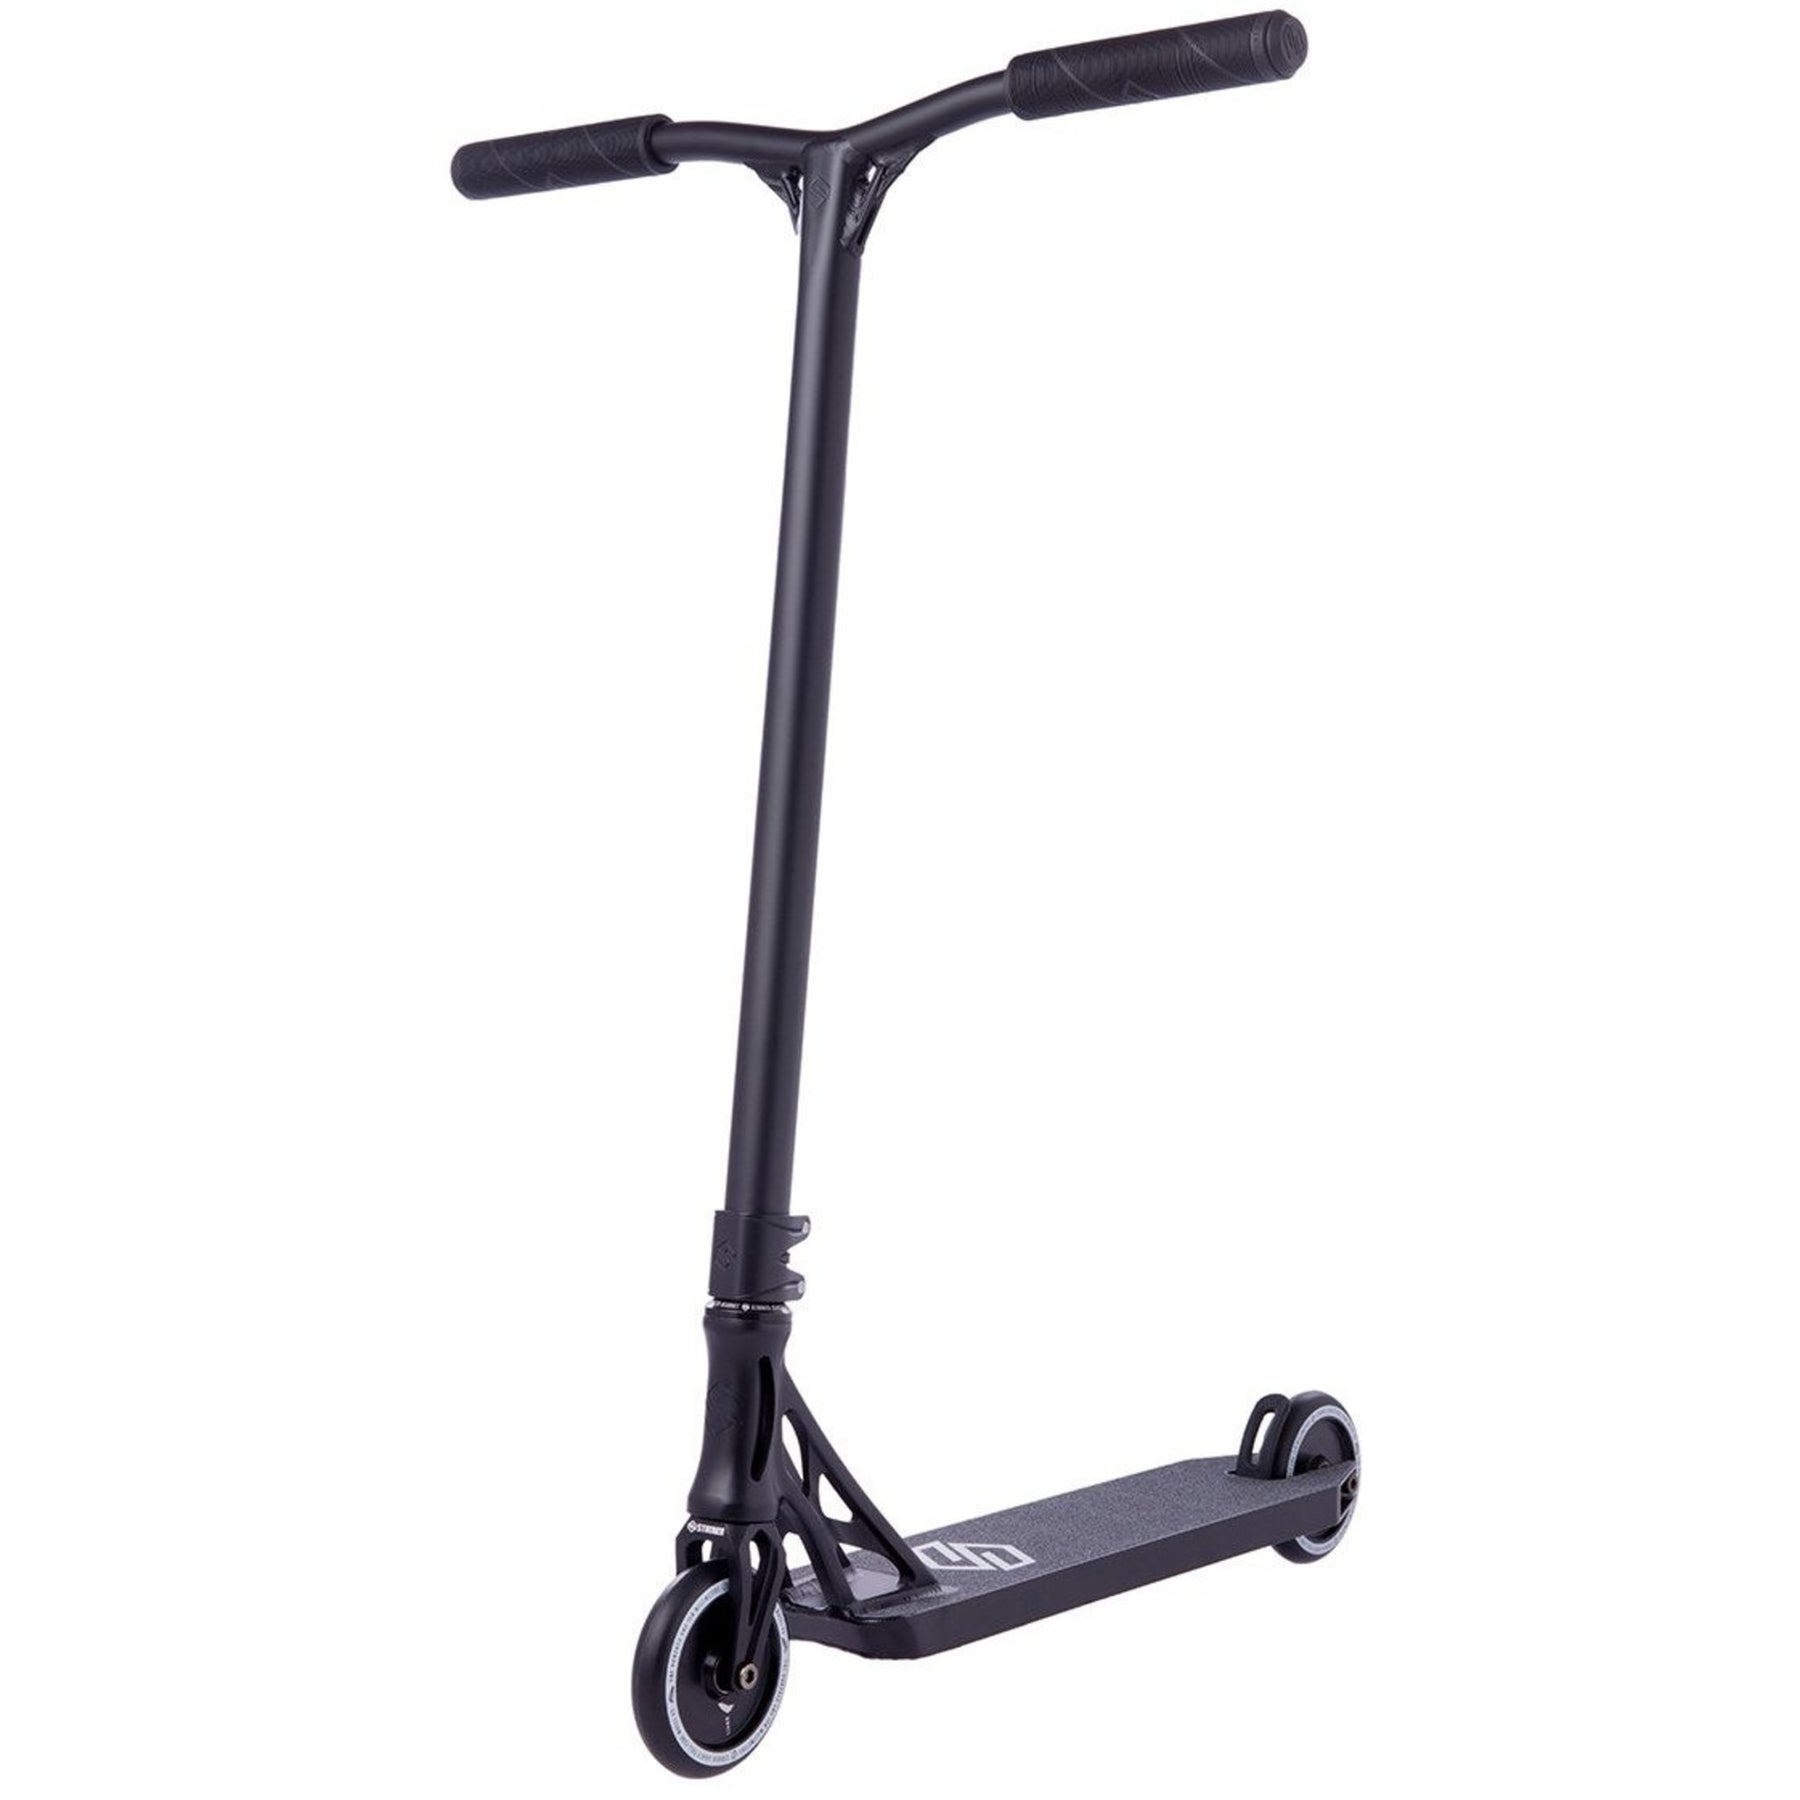 Quelle Trottinette Freestyle choisir - Ride And Slide